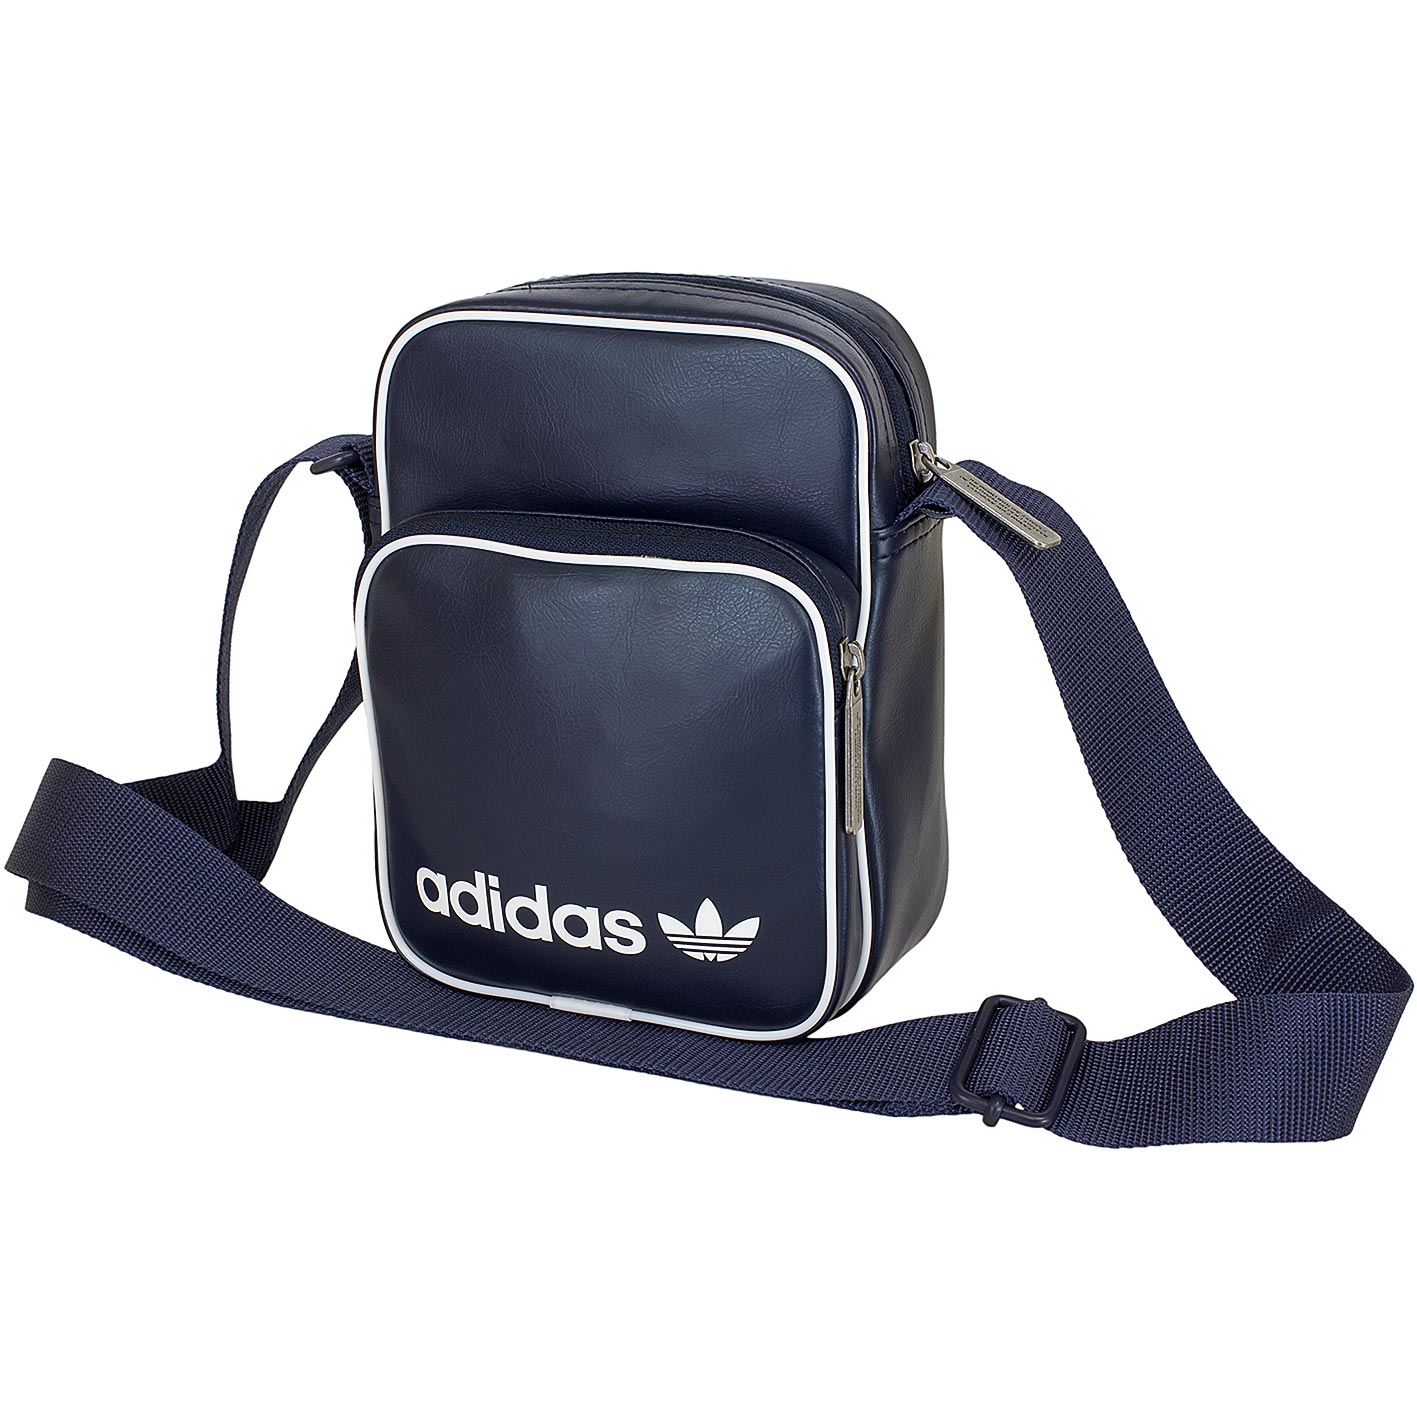 handy Melodious Quadrant adidas tasche mini bag stretch necklace replace